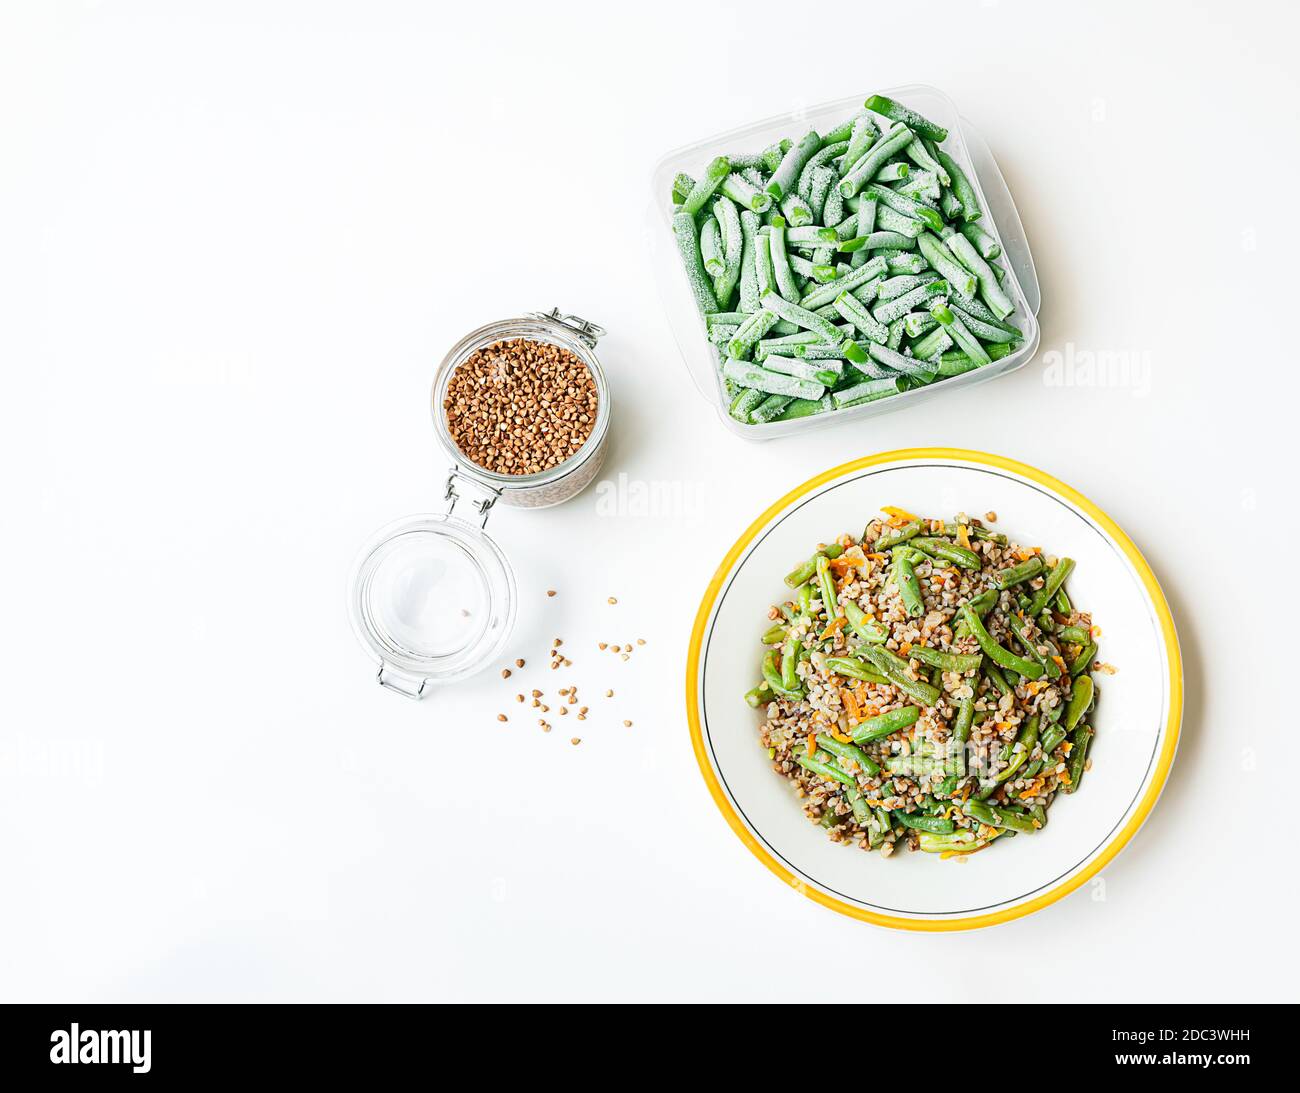 Buckwheat porridge with green beans and ingredients for its preparation - frozen green beens and buckwheat in a glass jar on the white table, healthy Stock Photo